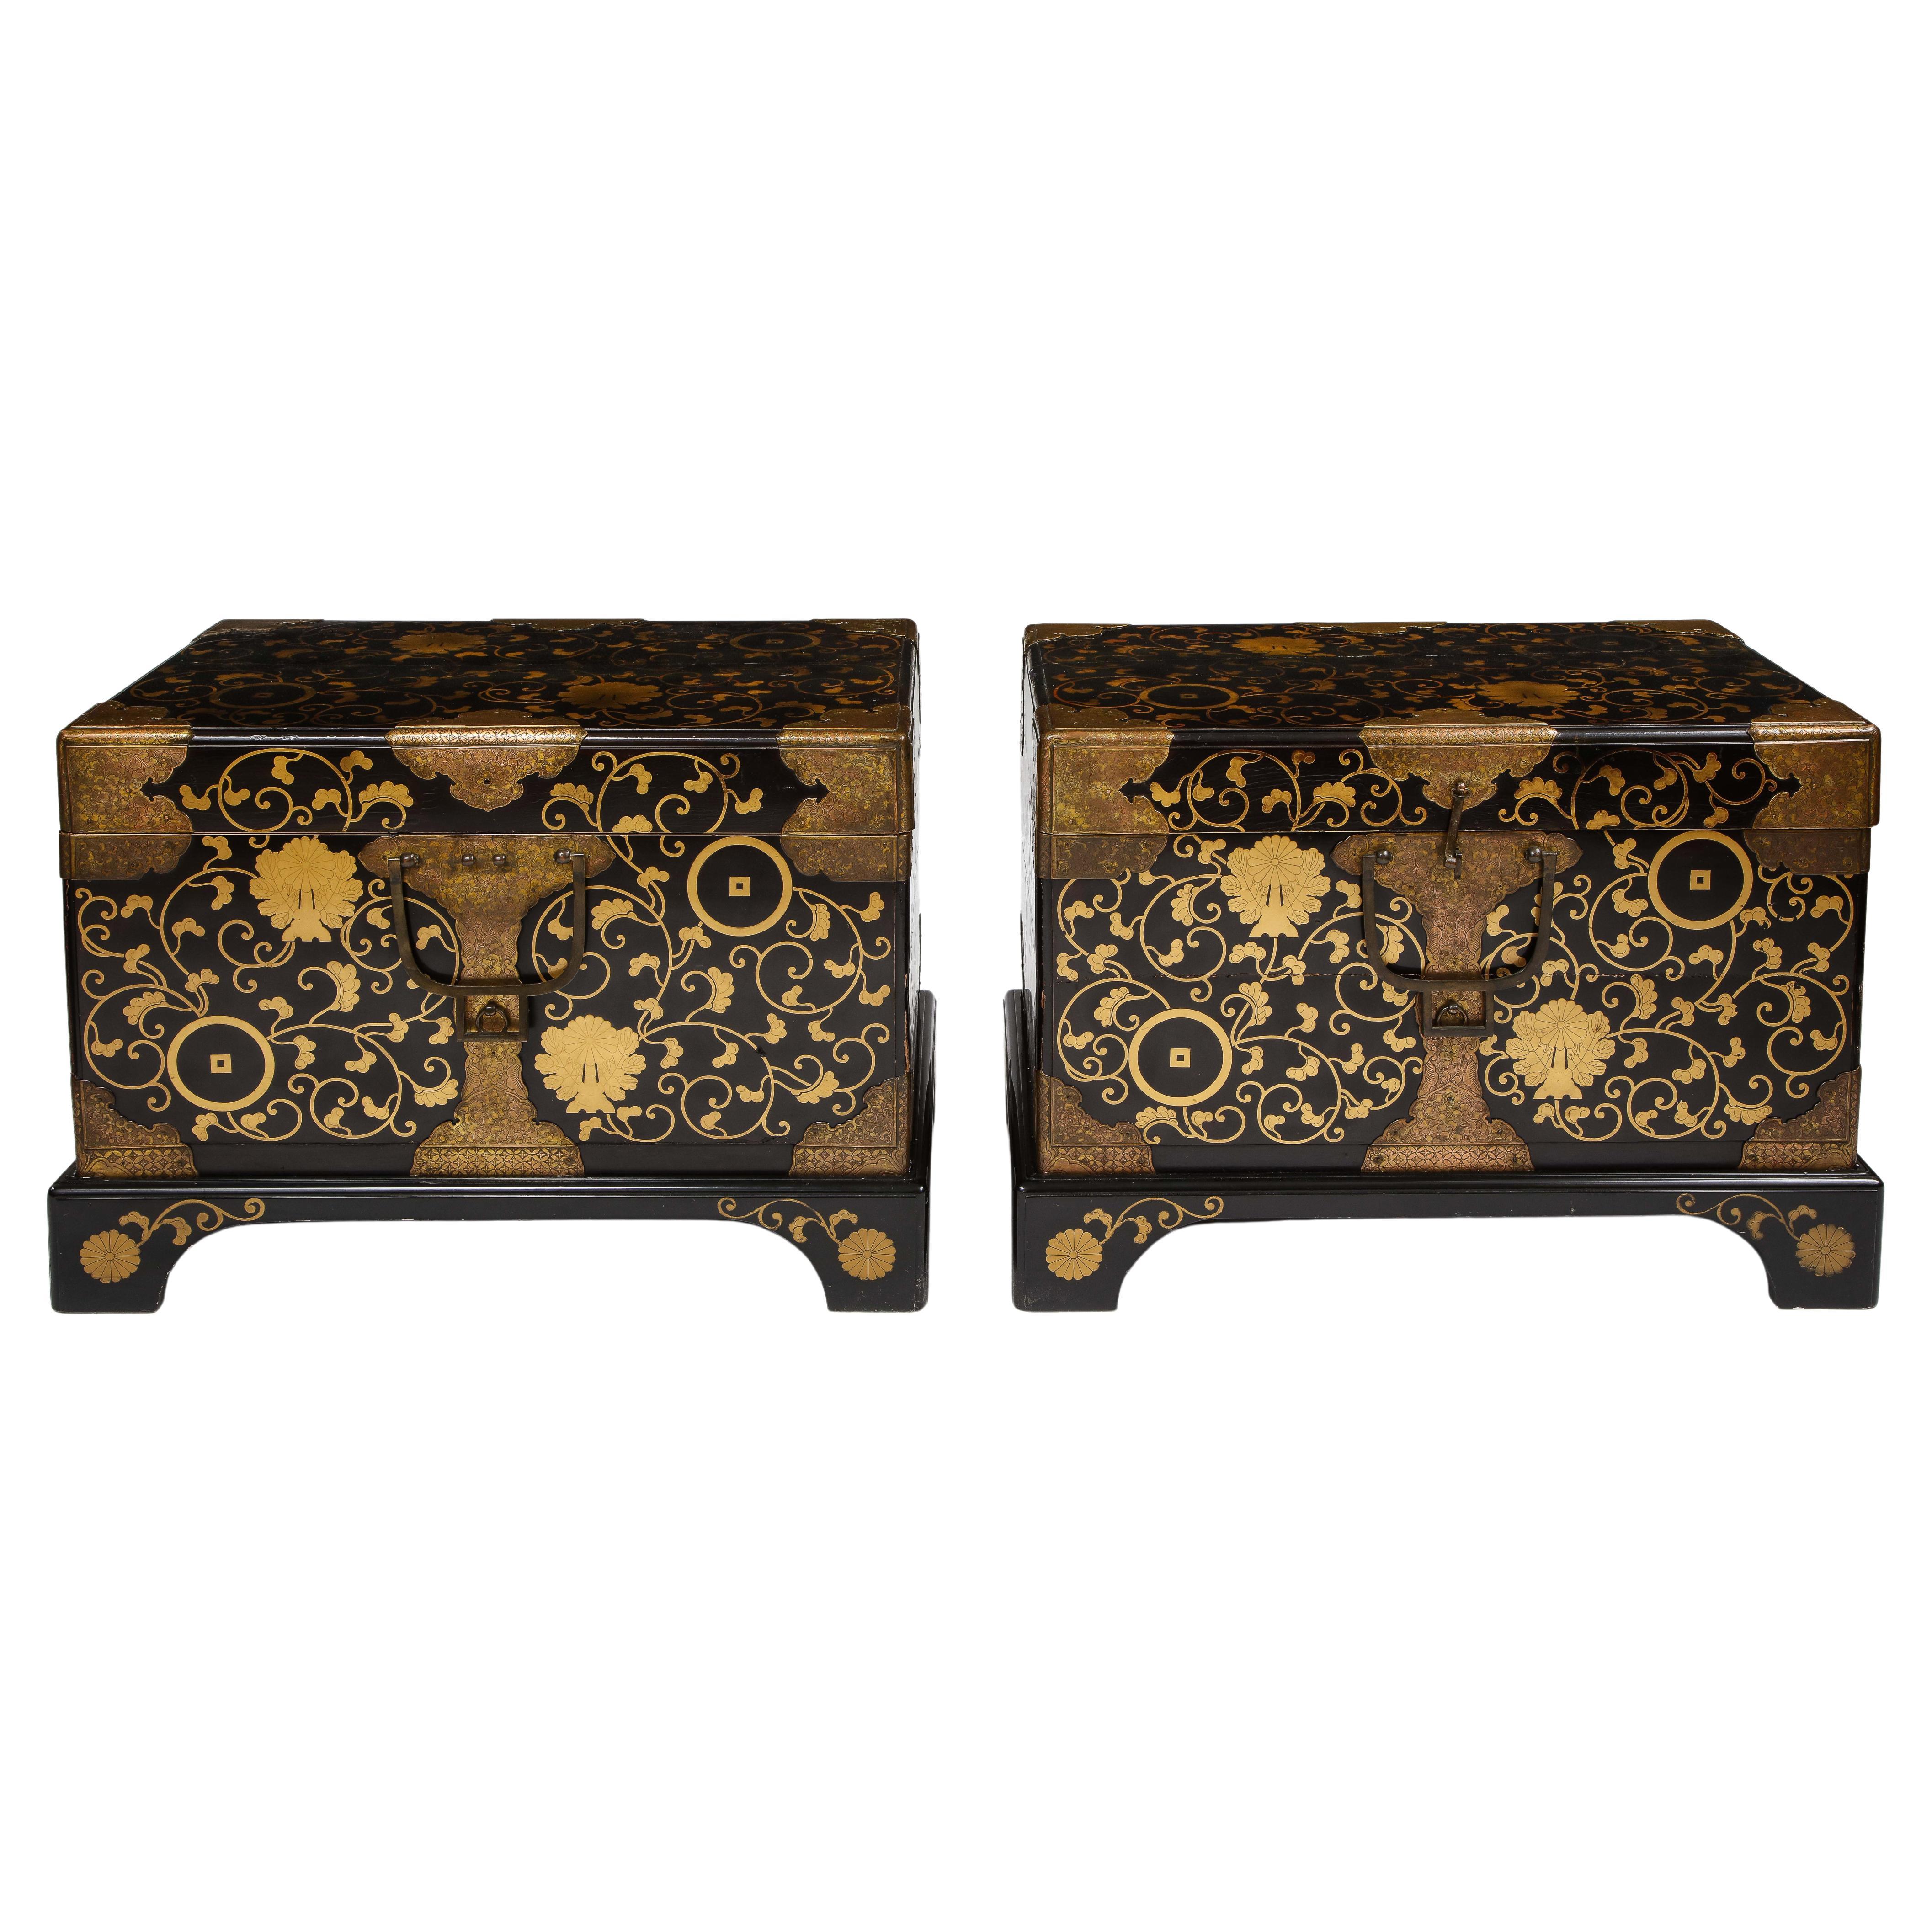  Pair of 19th Century Japanese Meiji Period Dore Bronze Mounted Lacquered Chests For Sale